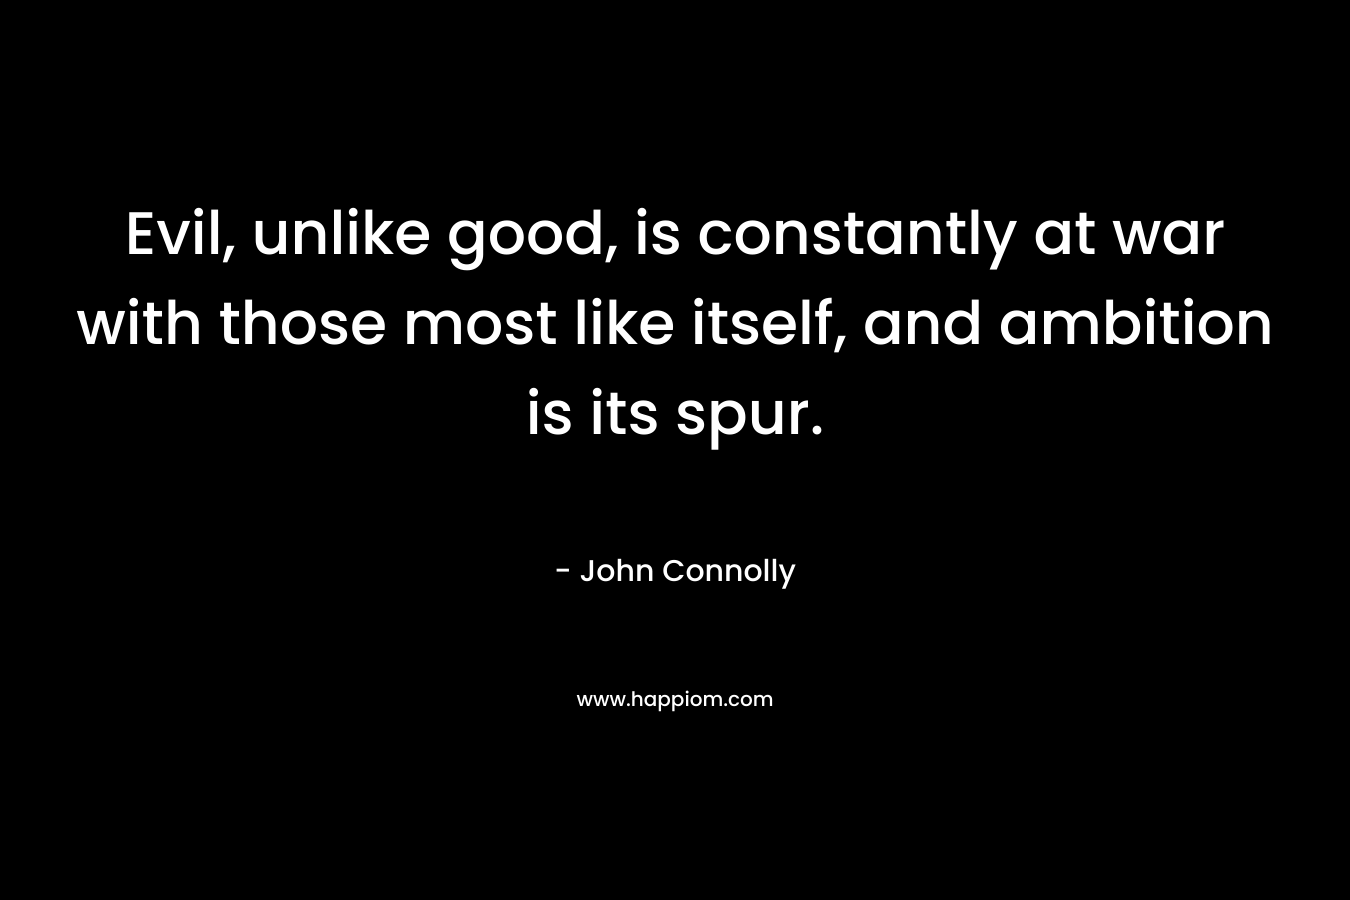 Evil, unlike good, is constantly at war with those most like itself, and ambition is its spur. – John Connolly